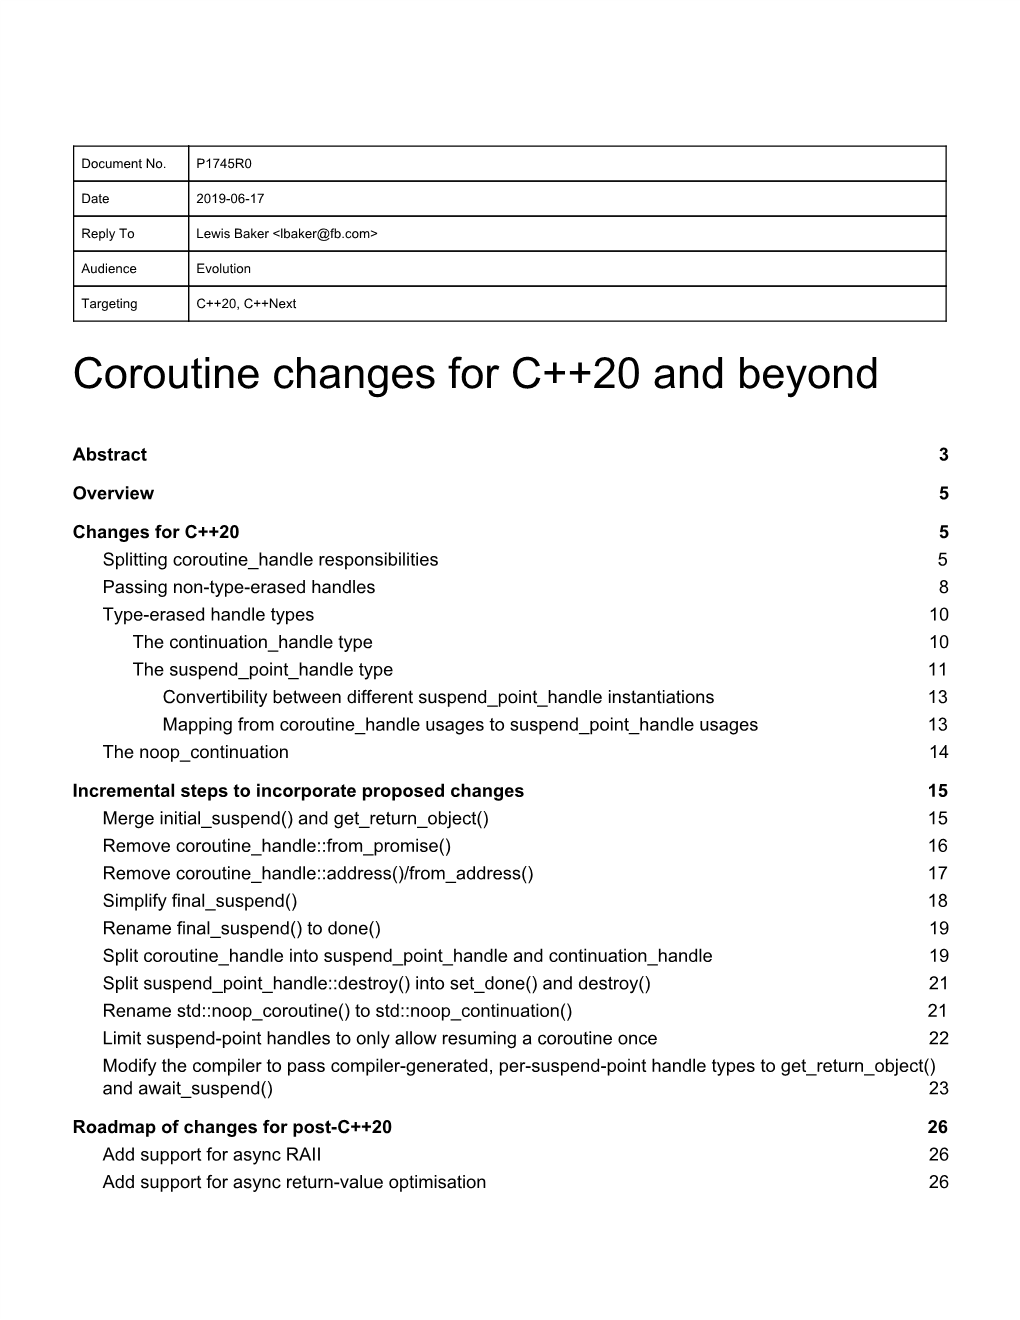 Coroutine Changes for C++20 and Beyond